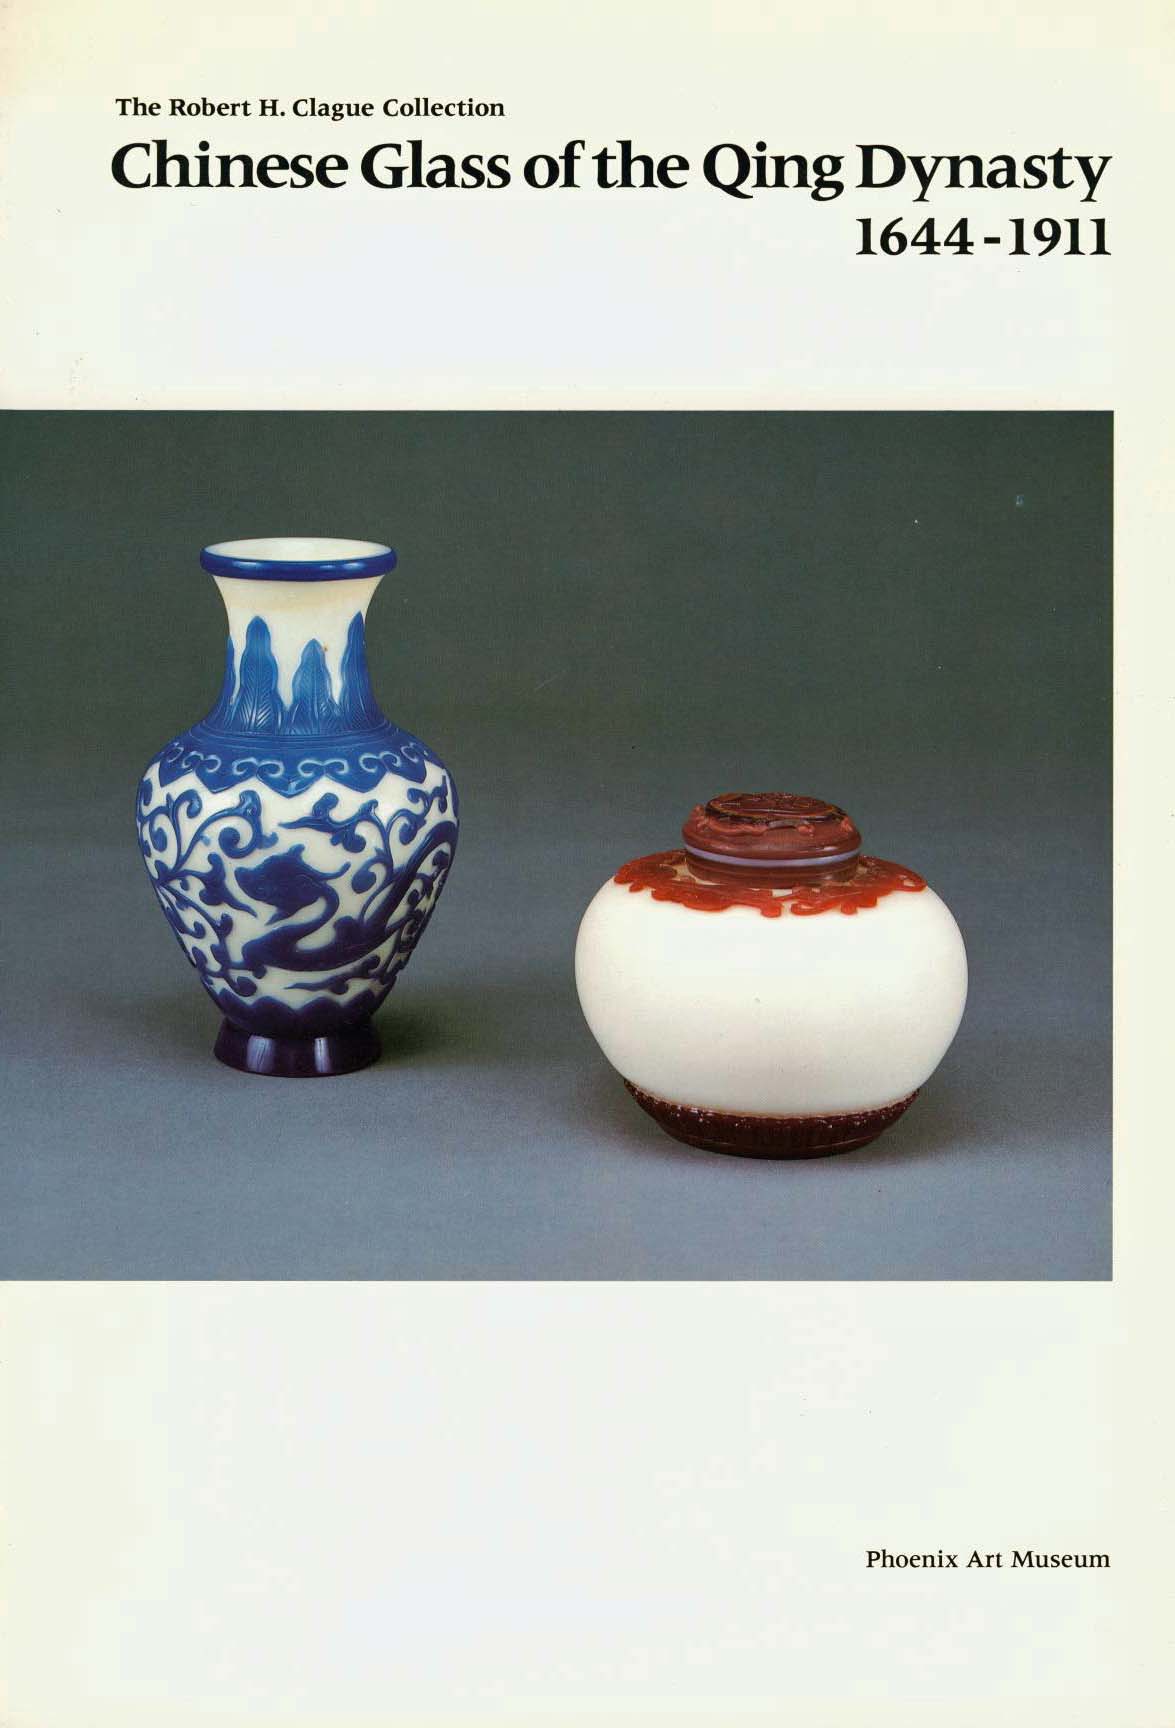 Brown, Claudia & Rabiner, Donald - Chinese Glass of the Qing Dynasty (1644-1911) - The Robert H. Clague Collection